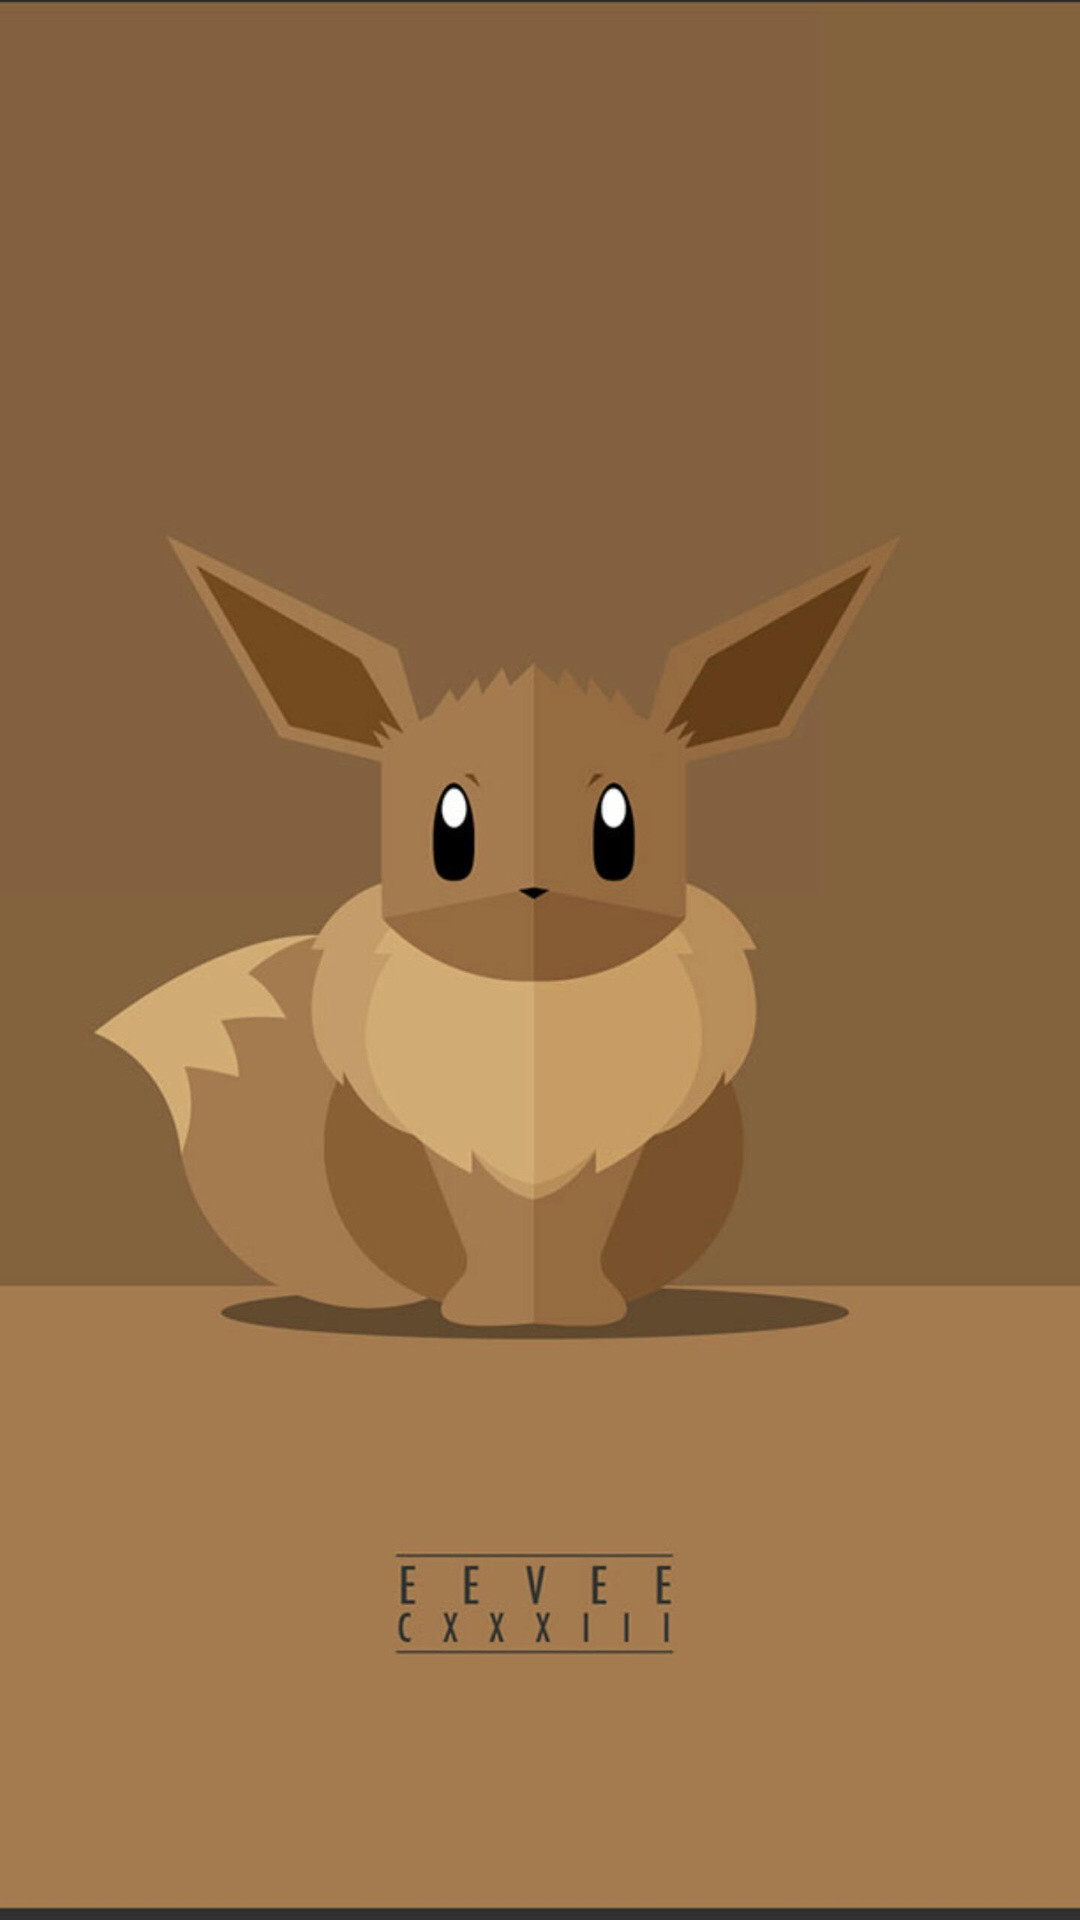 Deviant Art user Weaponix has created a series of minimalistic posters  depicting the different evolved forms of Eevee. For the uninitiated,.